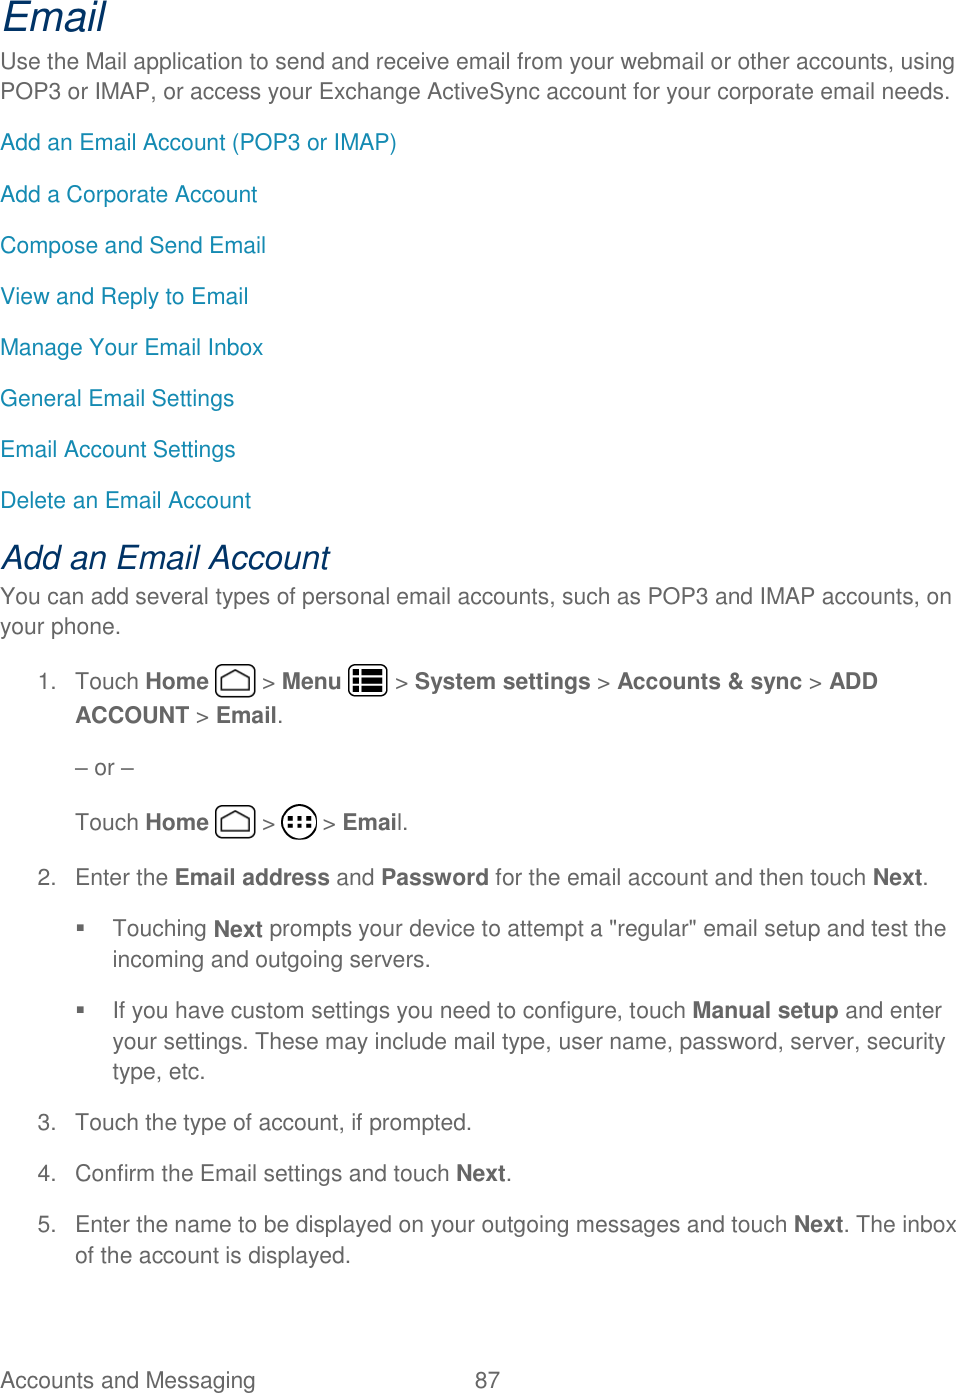 Accounts and Messaging  87   Email Use the Mail application to send and receive email from your webmail or other accounts, using POP3 or IMAP, or access your Exchange ActiveSync account for your corporate email needs. Add an Email Account (POP3 or IMAP) Add a Corporate Account Compose and Send Email View and Reply to Email Manage Your Email Inbox General Email Settings Email Account Settings Delete an Email Account Add an Email Account  You can add several types of personal email accounts, such as POP3 and IMAP accounts, on your phone. 1.  Touch Home   &gt; Menu   &gt; System settings &gt; Accounts &amp; sync &gt; ADD ACCOUNT &gt; Email. – or – Touch Home   &gt;   &gt; Email. 2.  Enter the Email address and Password for the email account and then touch Next.   Touching Next prompts your device to attempt a &quot;regular&quot; email setup and test the incoming and outgoing servers.    If you have custom settings you need to configure, touch Manual setup and enter your settings. These may include mail type, user name, password, server, security type, etc. 3.  Touch the type of account, if prompted. 4.  Confirm the Email settings and touch Next. 5.  Enter the name to be displayed on your outgoing messages and touch Next. The inbox of the account is displayed. 